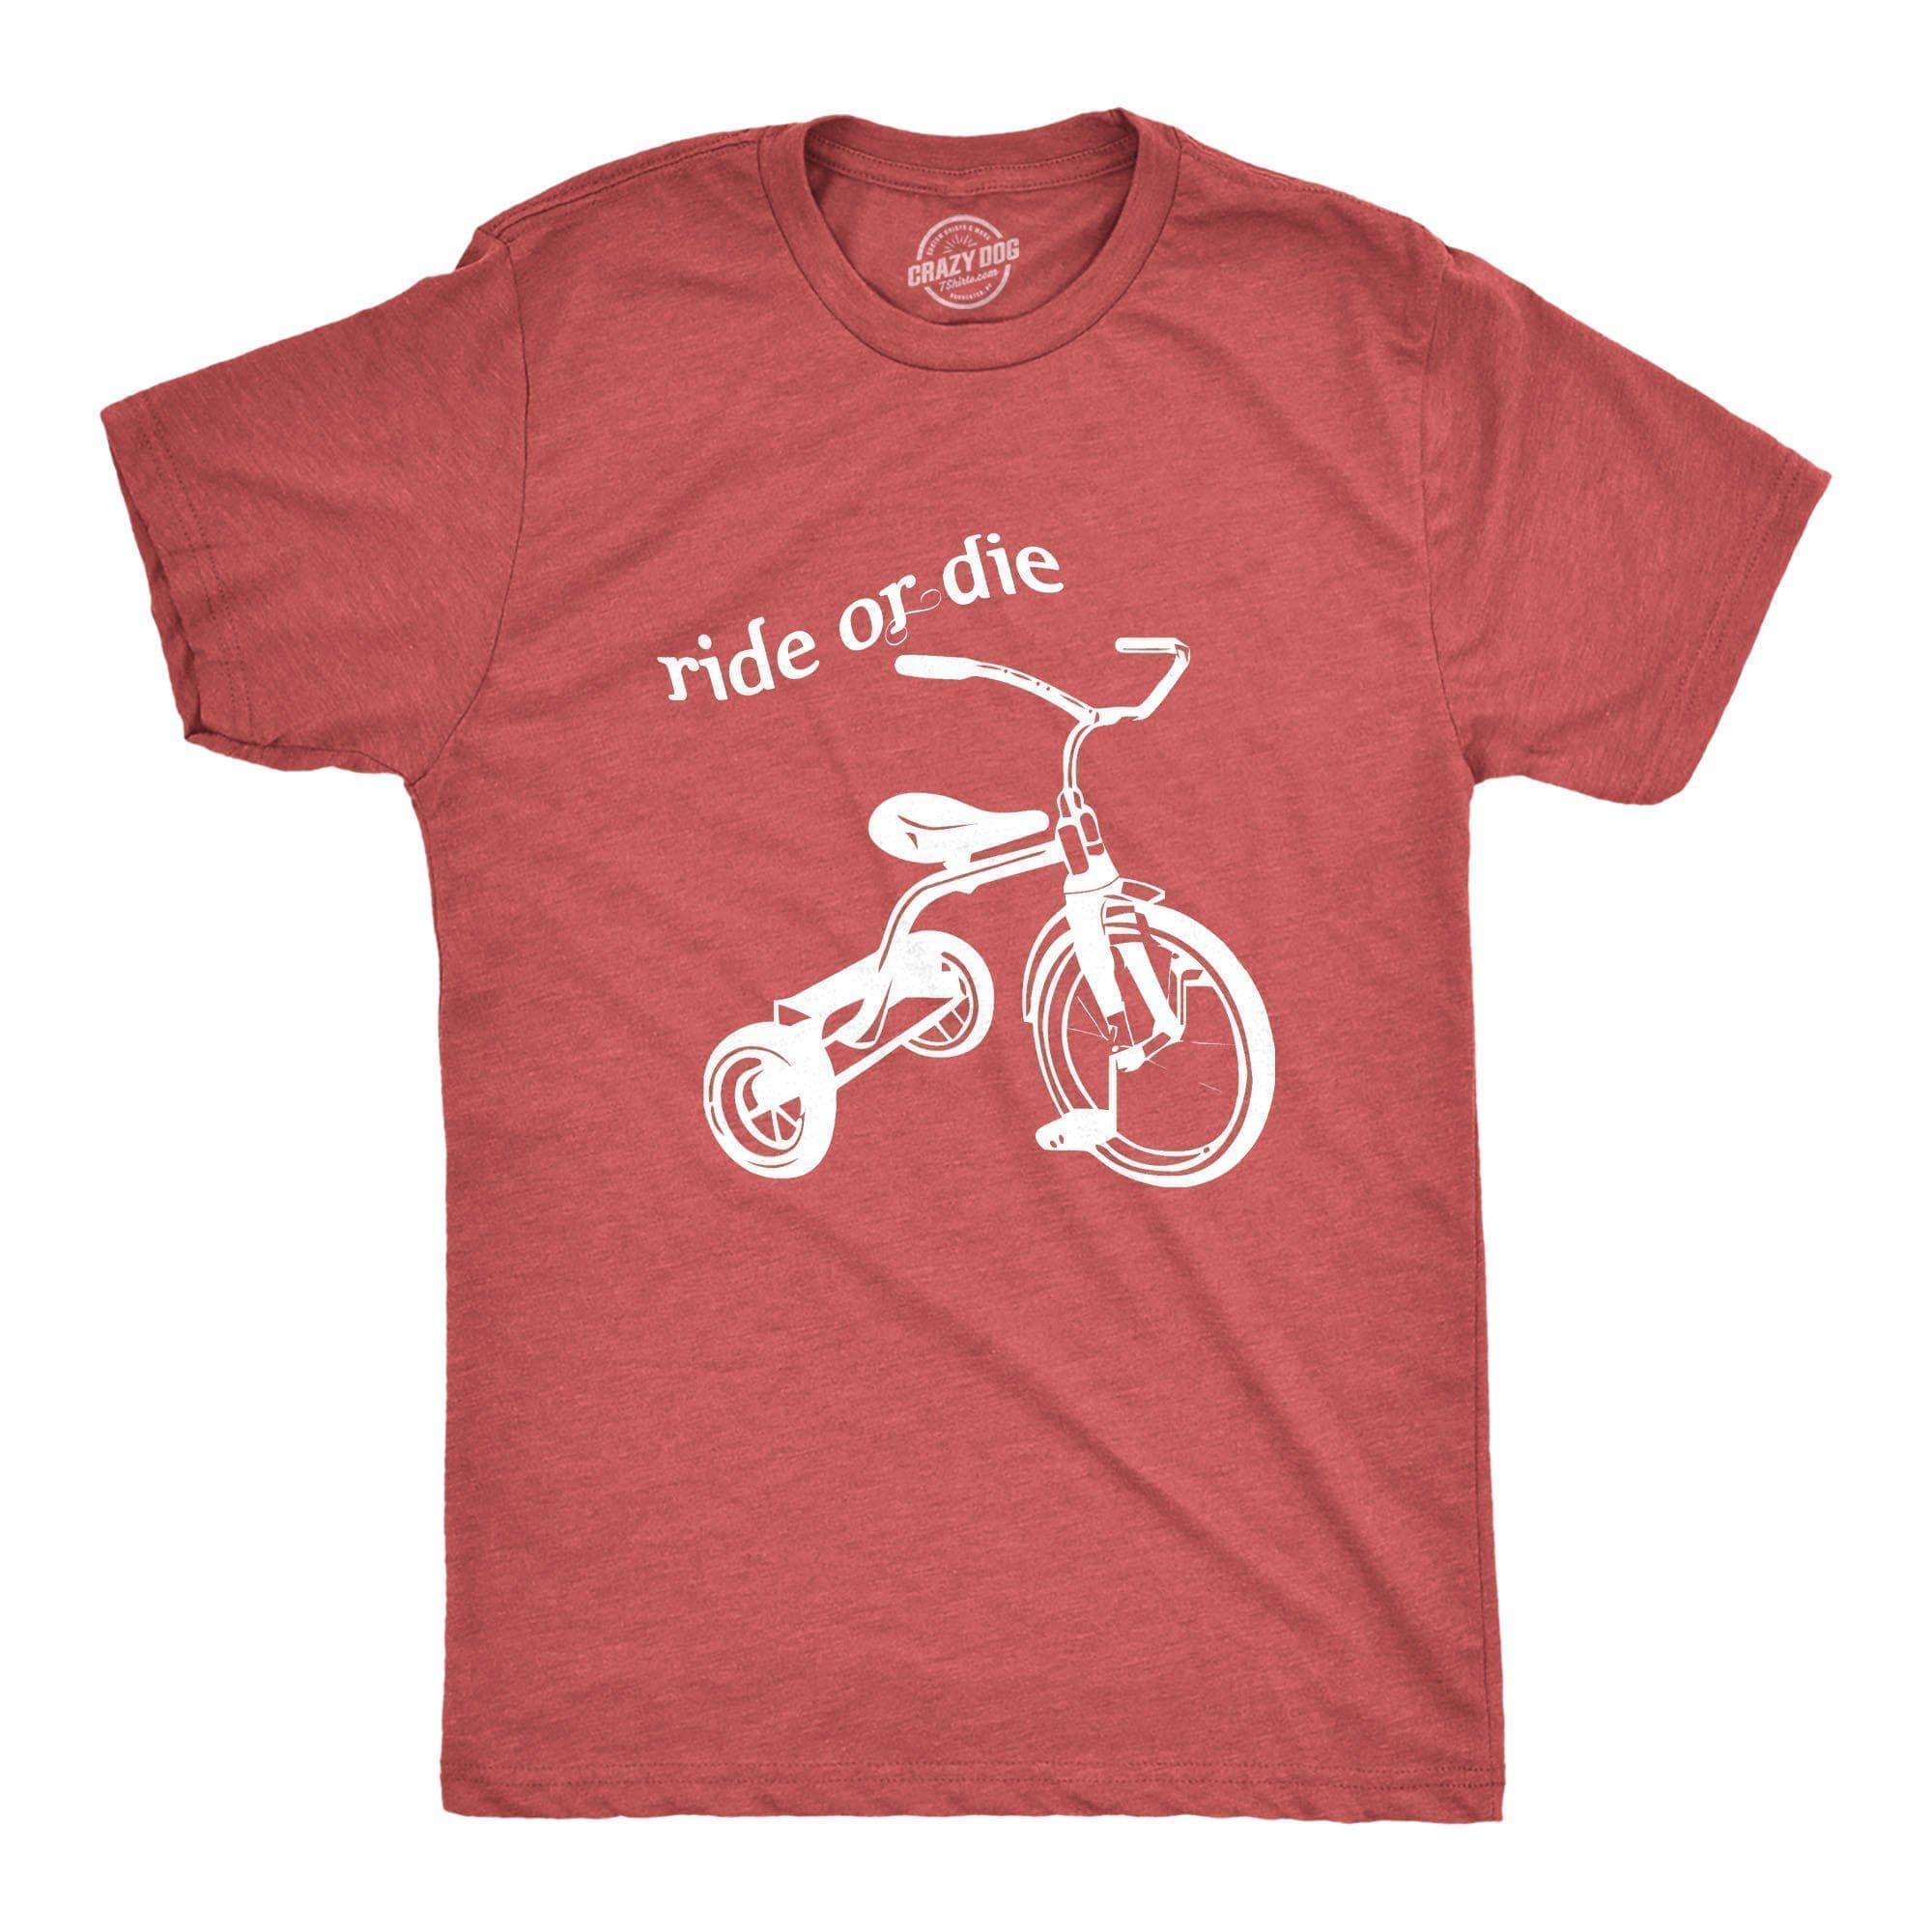 Ride Or Die Tricycle Men's Tshirt  -  Crazy Dog T-Shirts